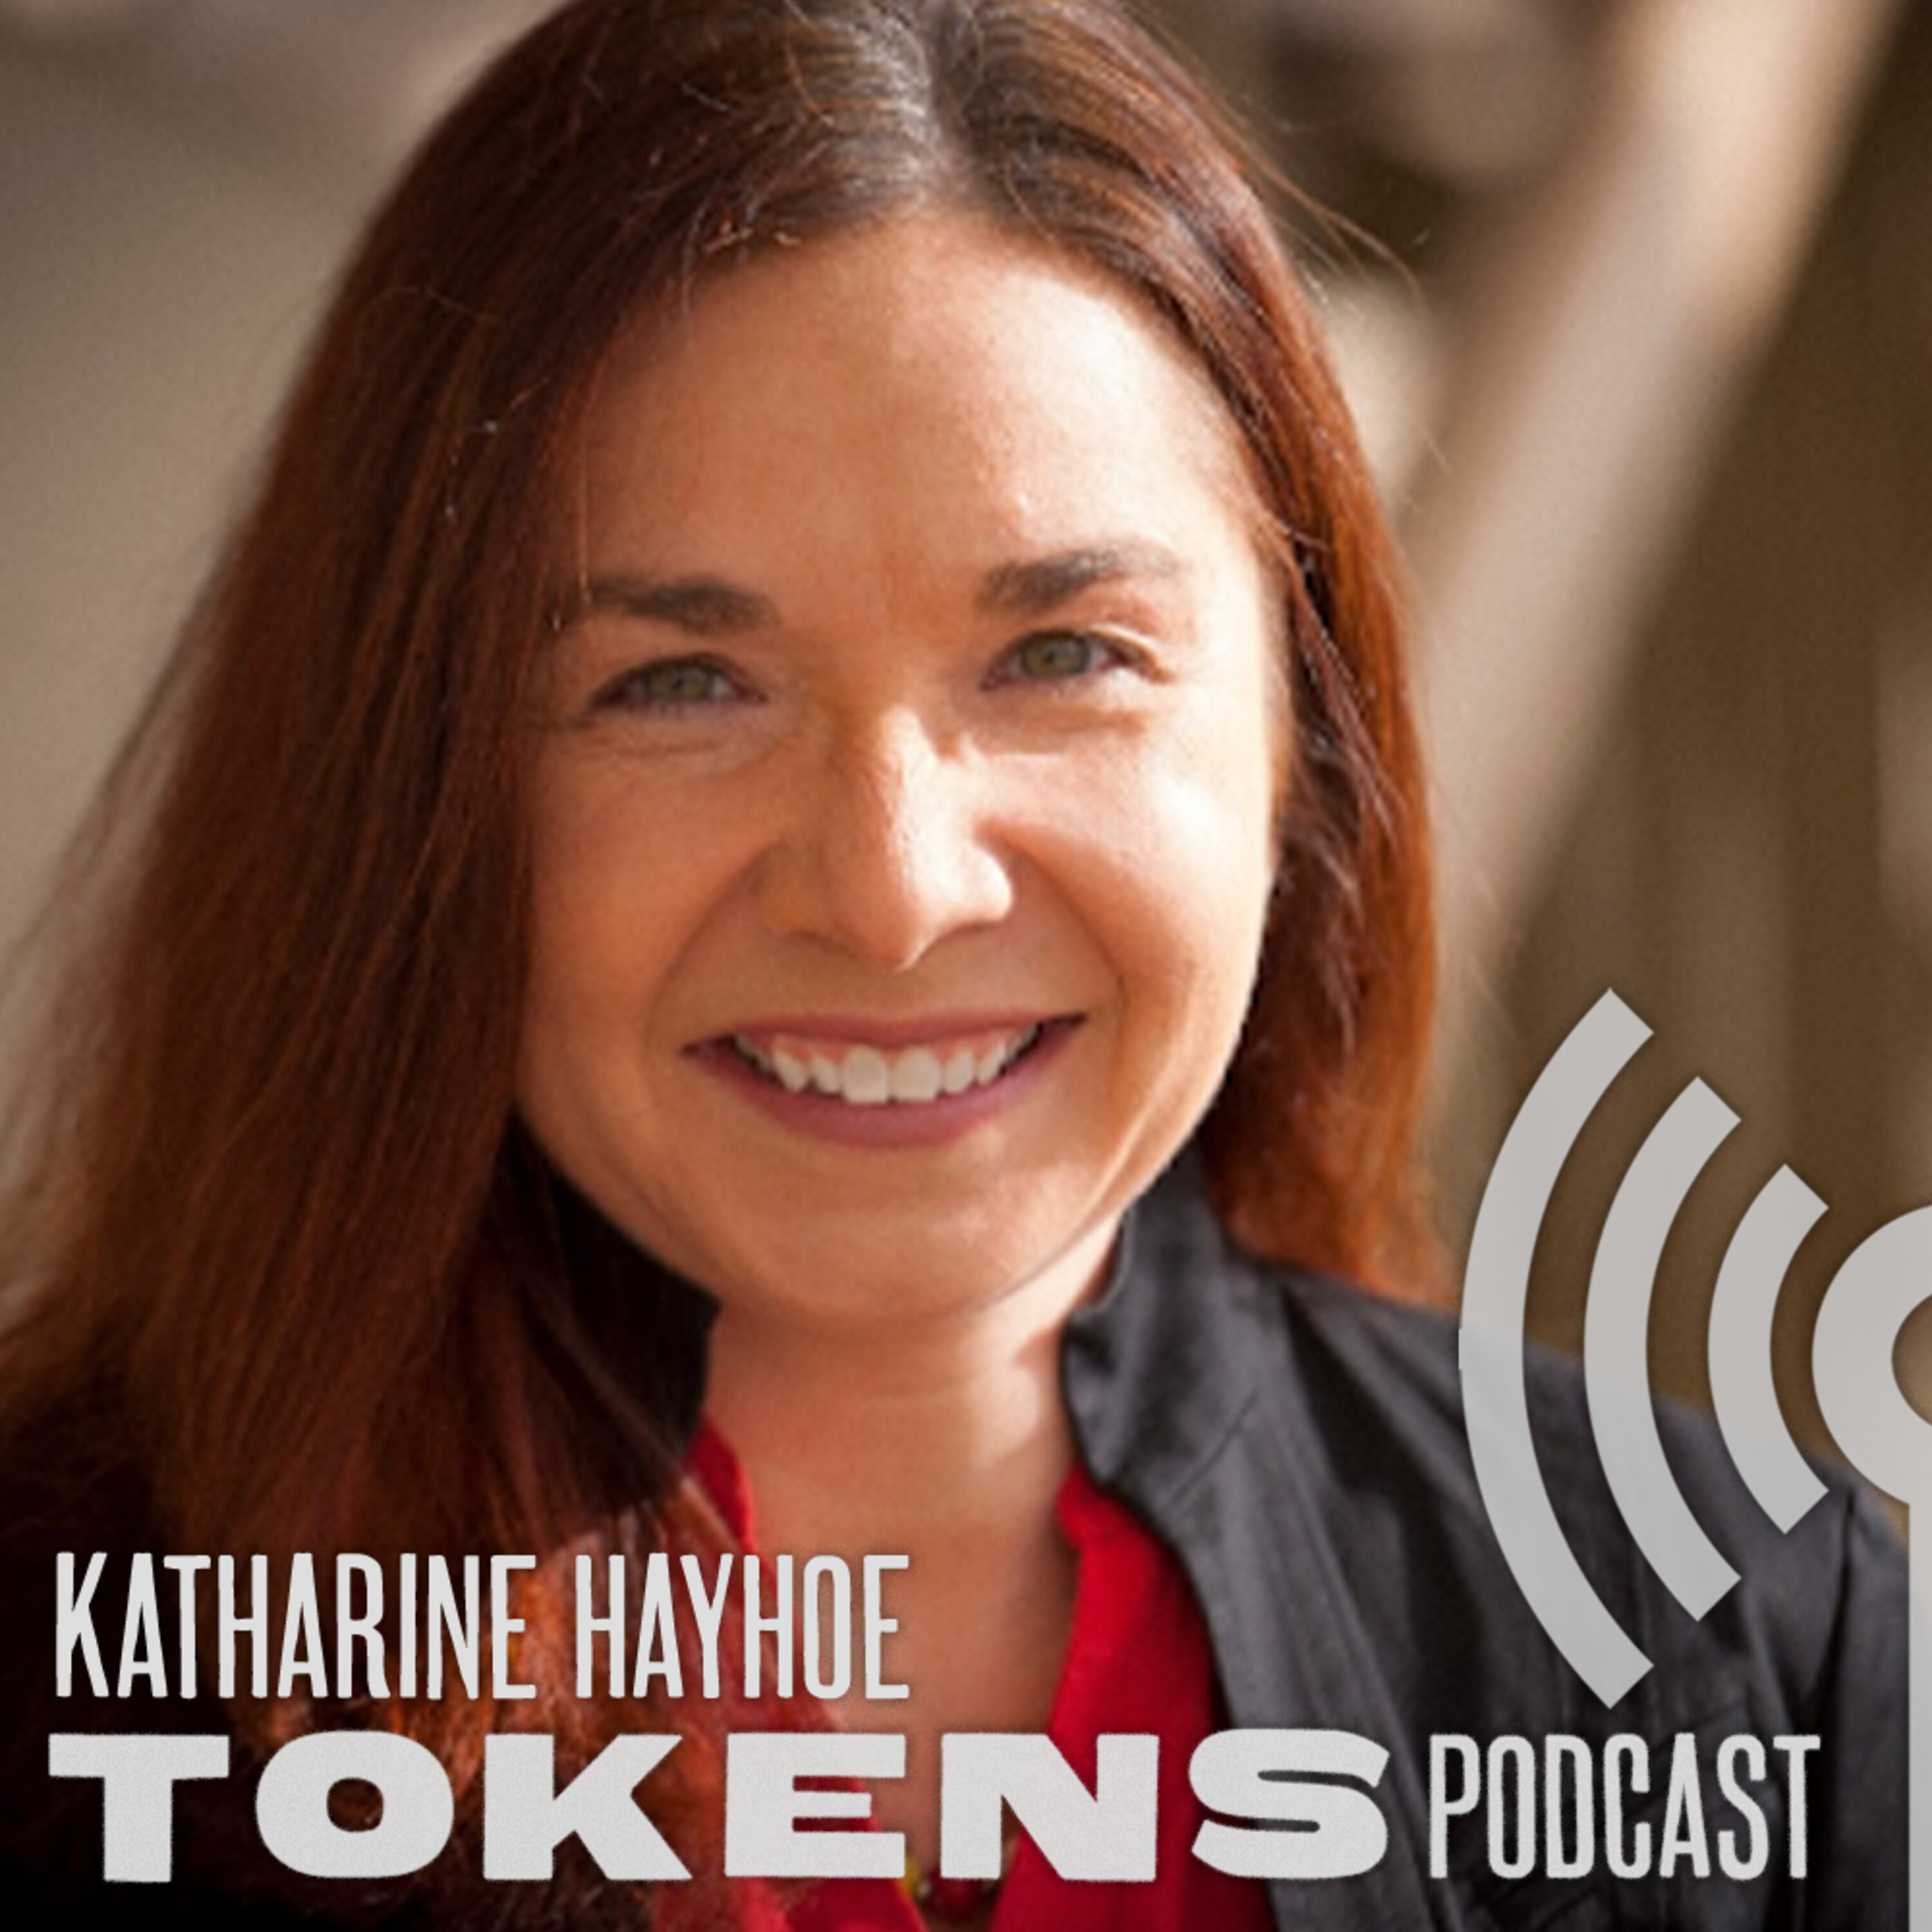 Thumbnail for "36: “The most polarized issue in the United States”: Katharine Hayhoe".